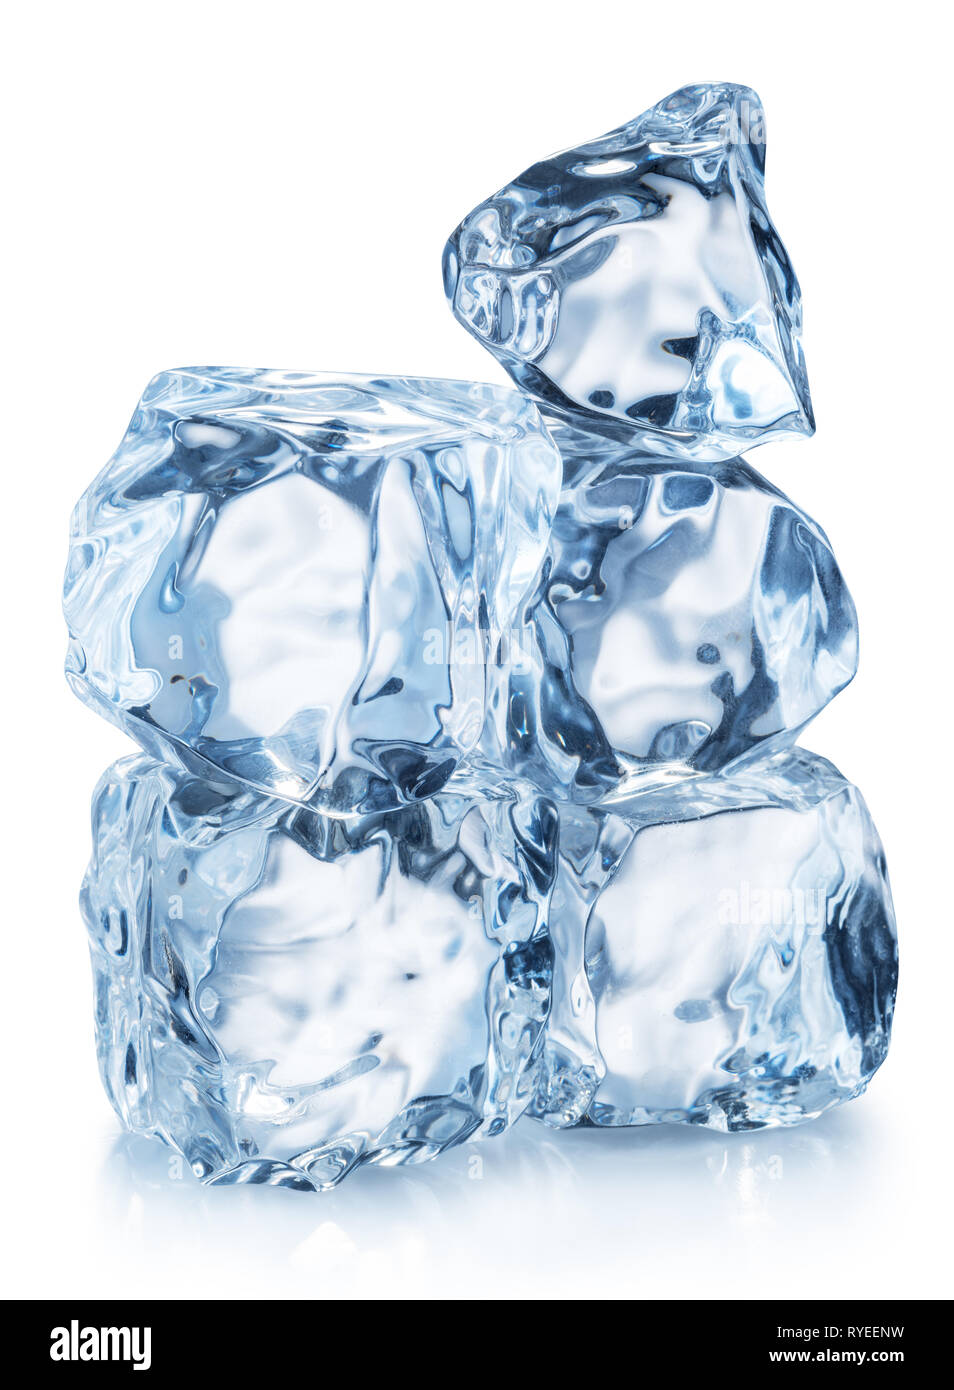 Ice cube pyramid. File contains clipping path Stock Photo - Alamy